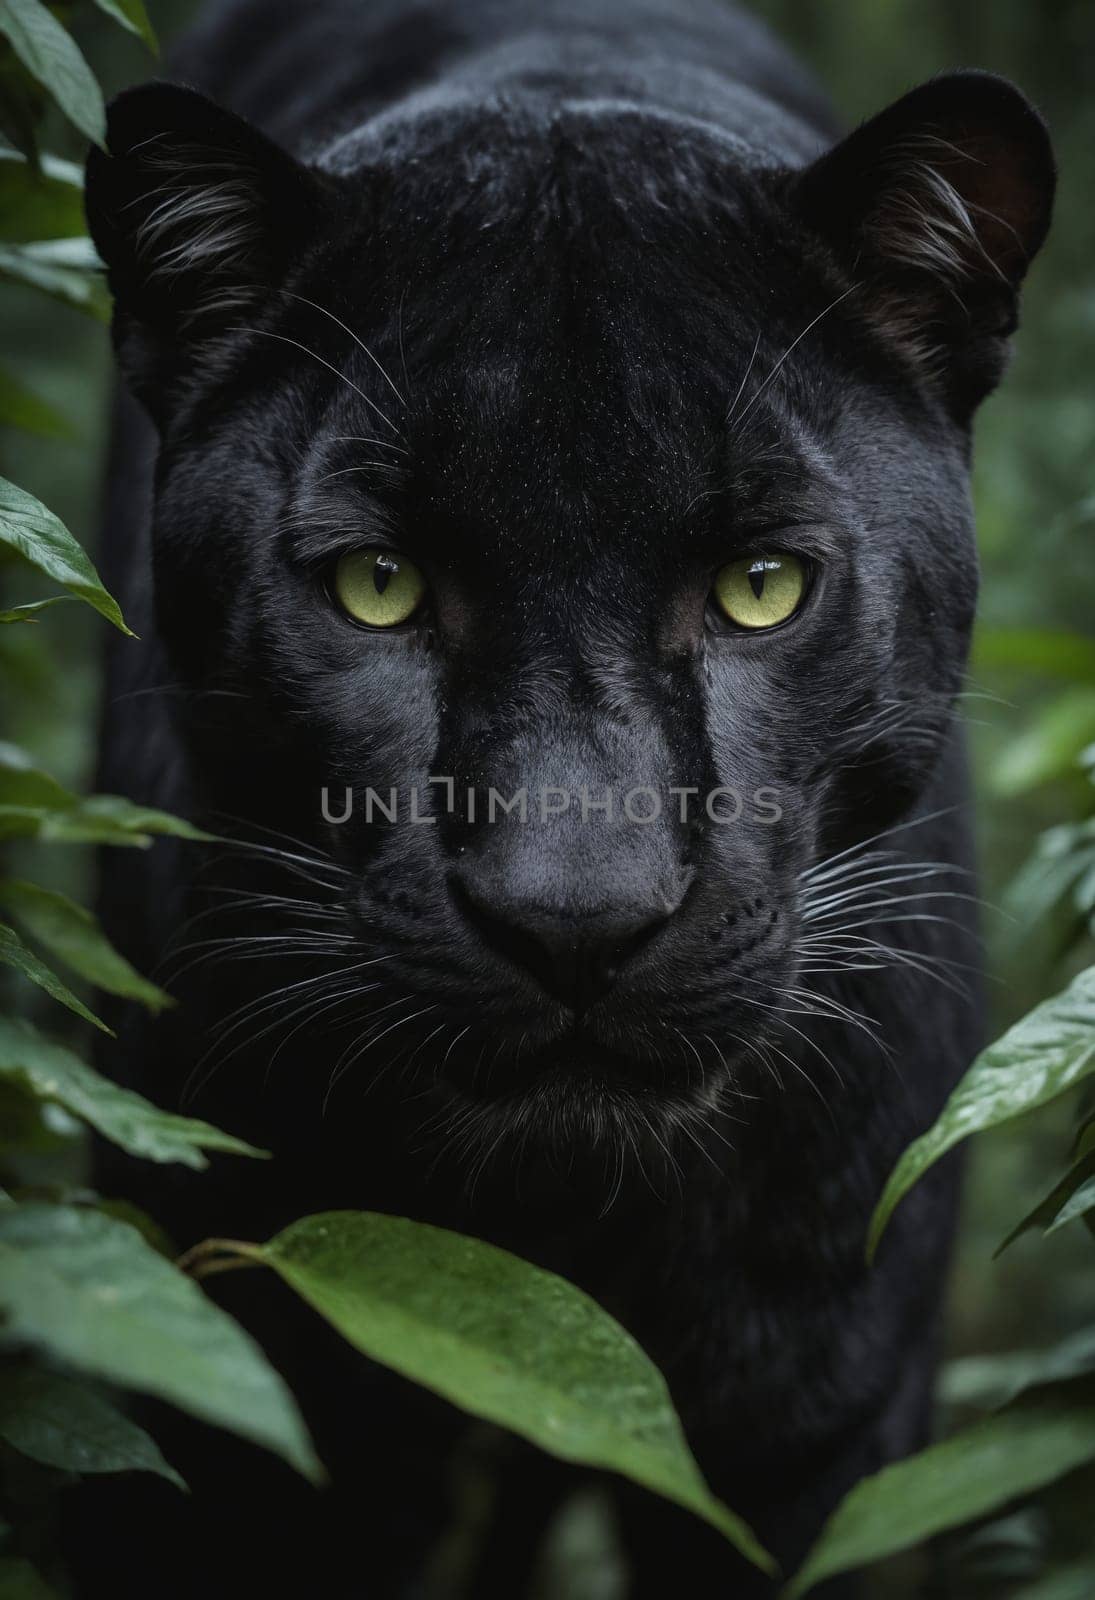 A Felidae carnivore, the black panther, gazes at the camera in the jungle by Andre1ns